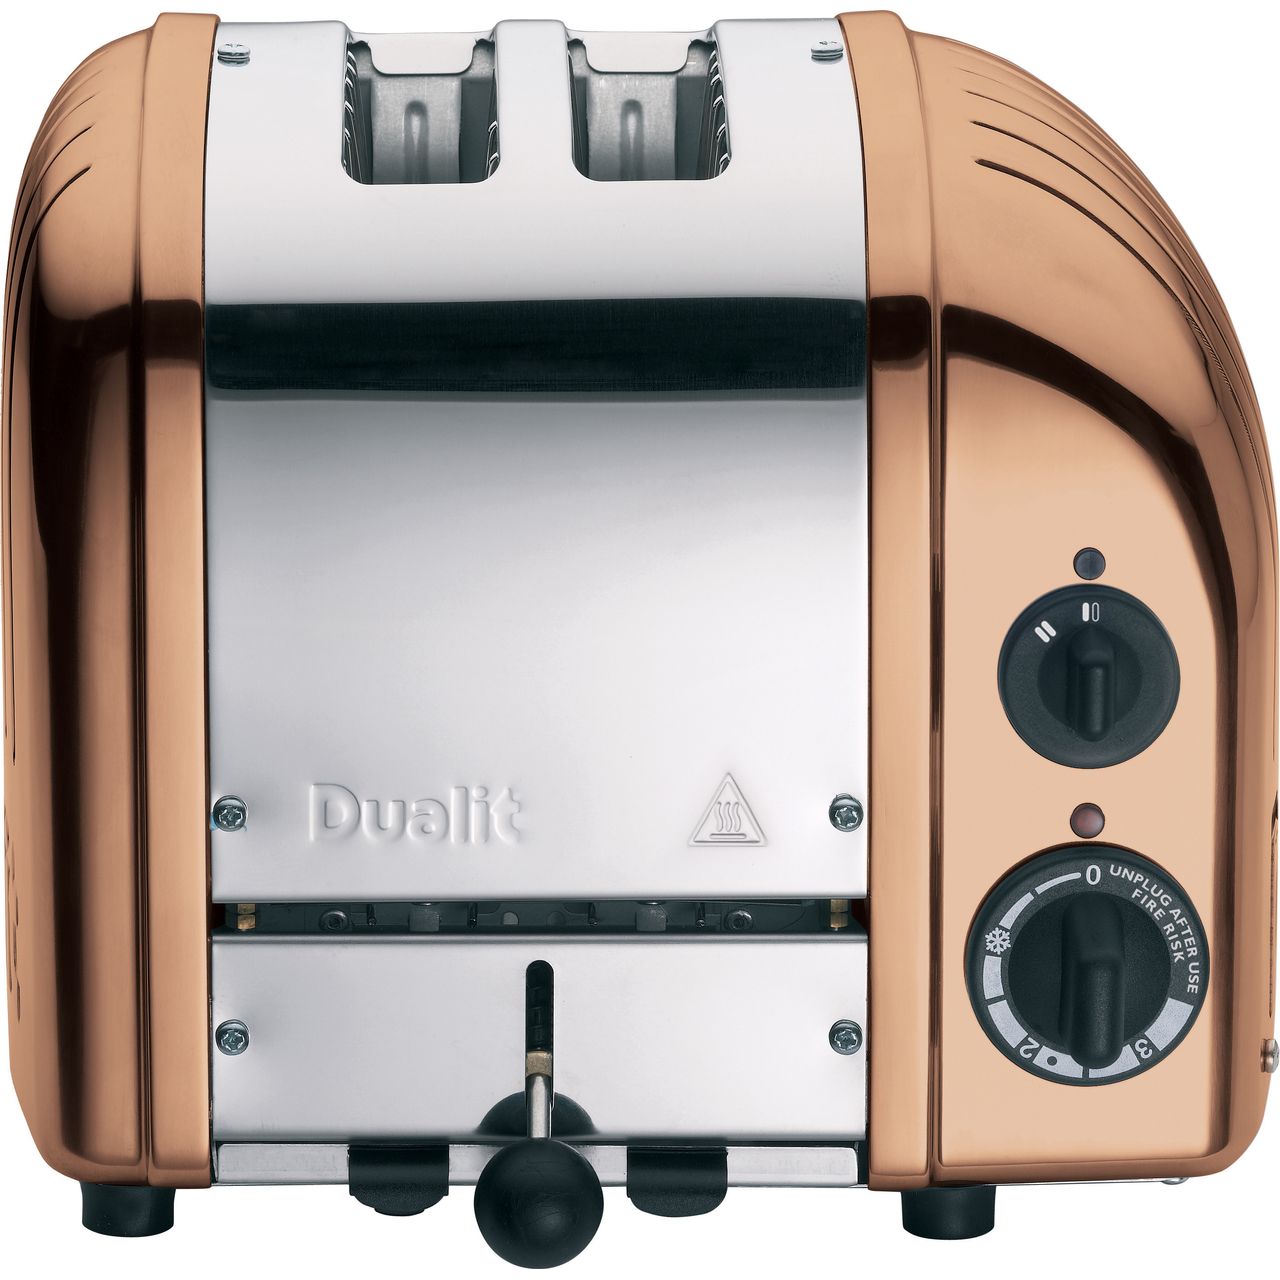 Dualit Classic 27450 2 Slice Toaster Review